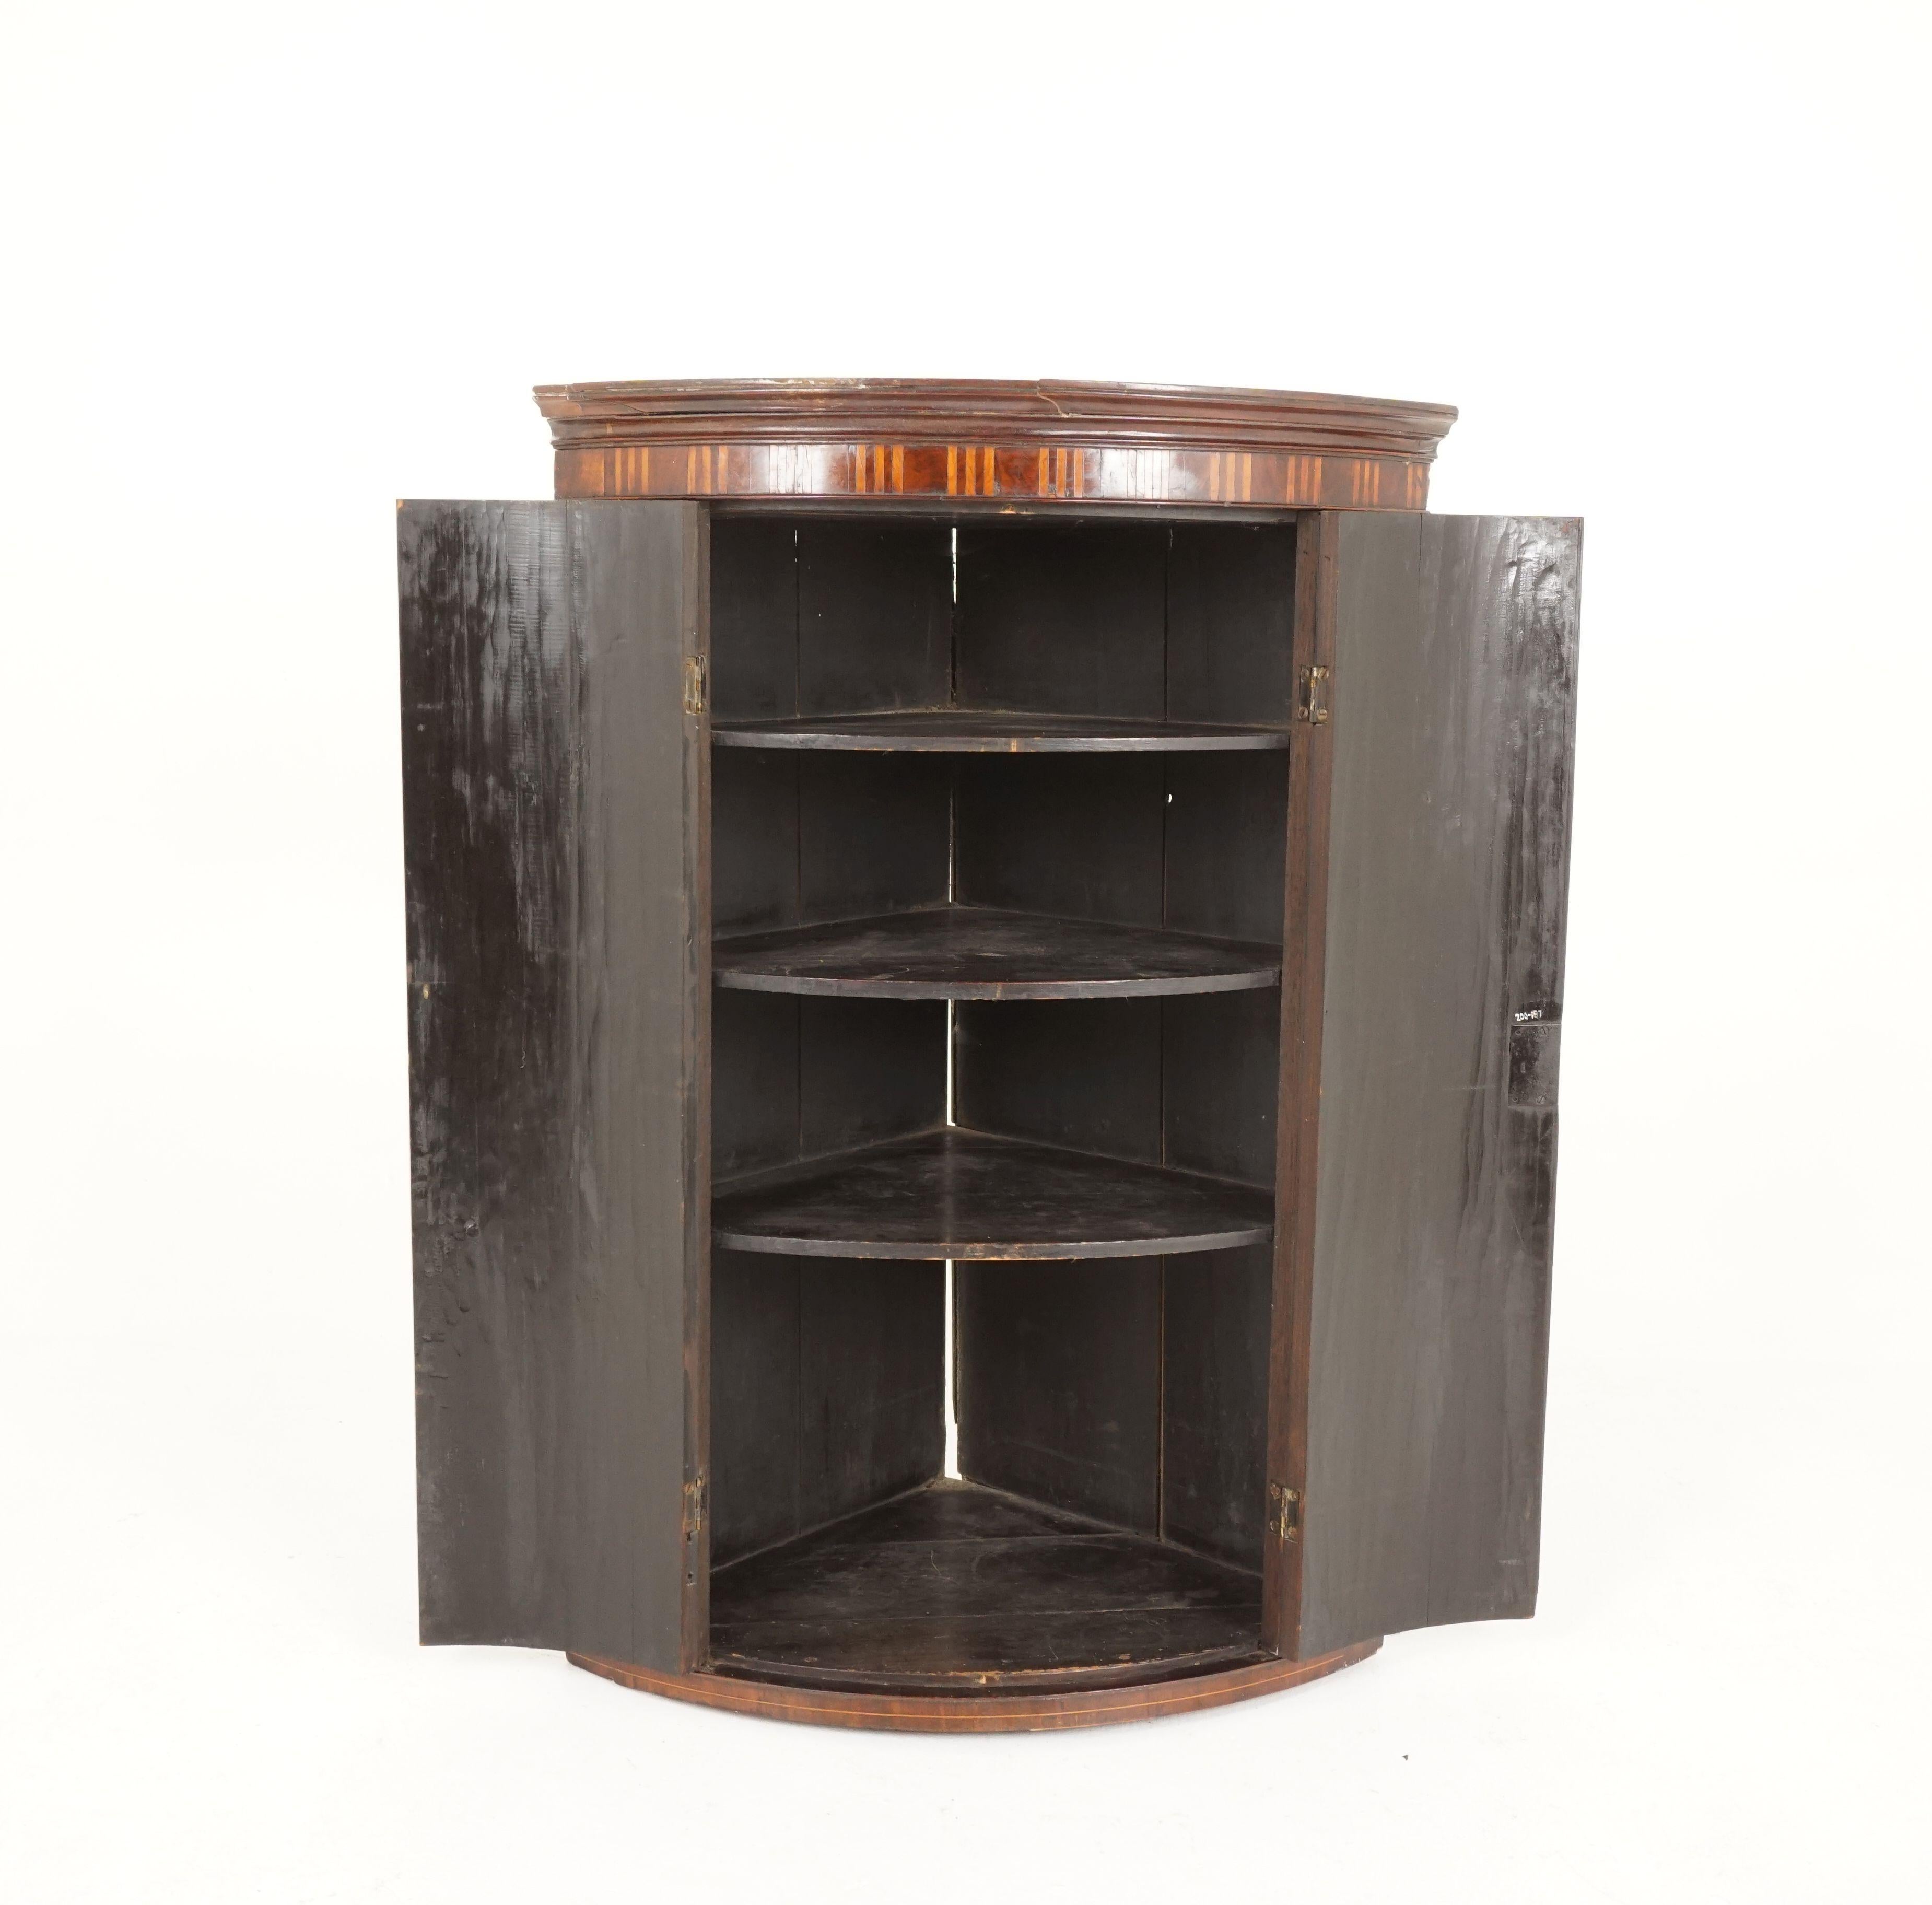 Antique hanging corner cabinet, inlaid Walnut, bow front, Scotland 1810, H138

Scotland, 1810
Solid Walnut and veneer
Original finish
Moulded cornice with an inlaid frieze
With fans and chevron border to the front and sides
Three internal